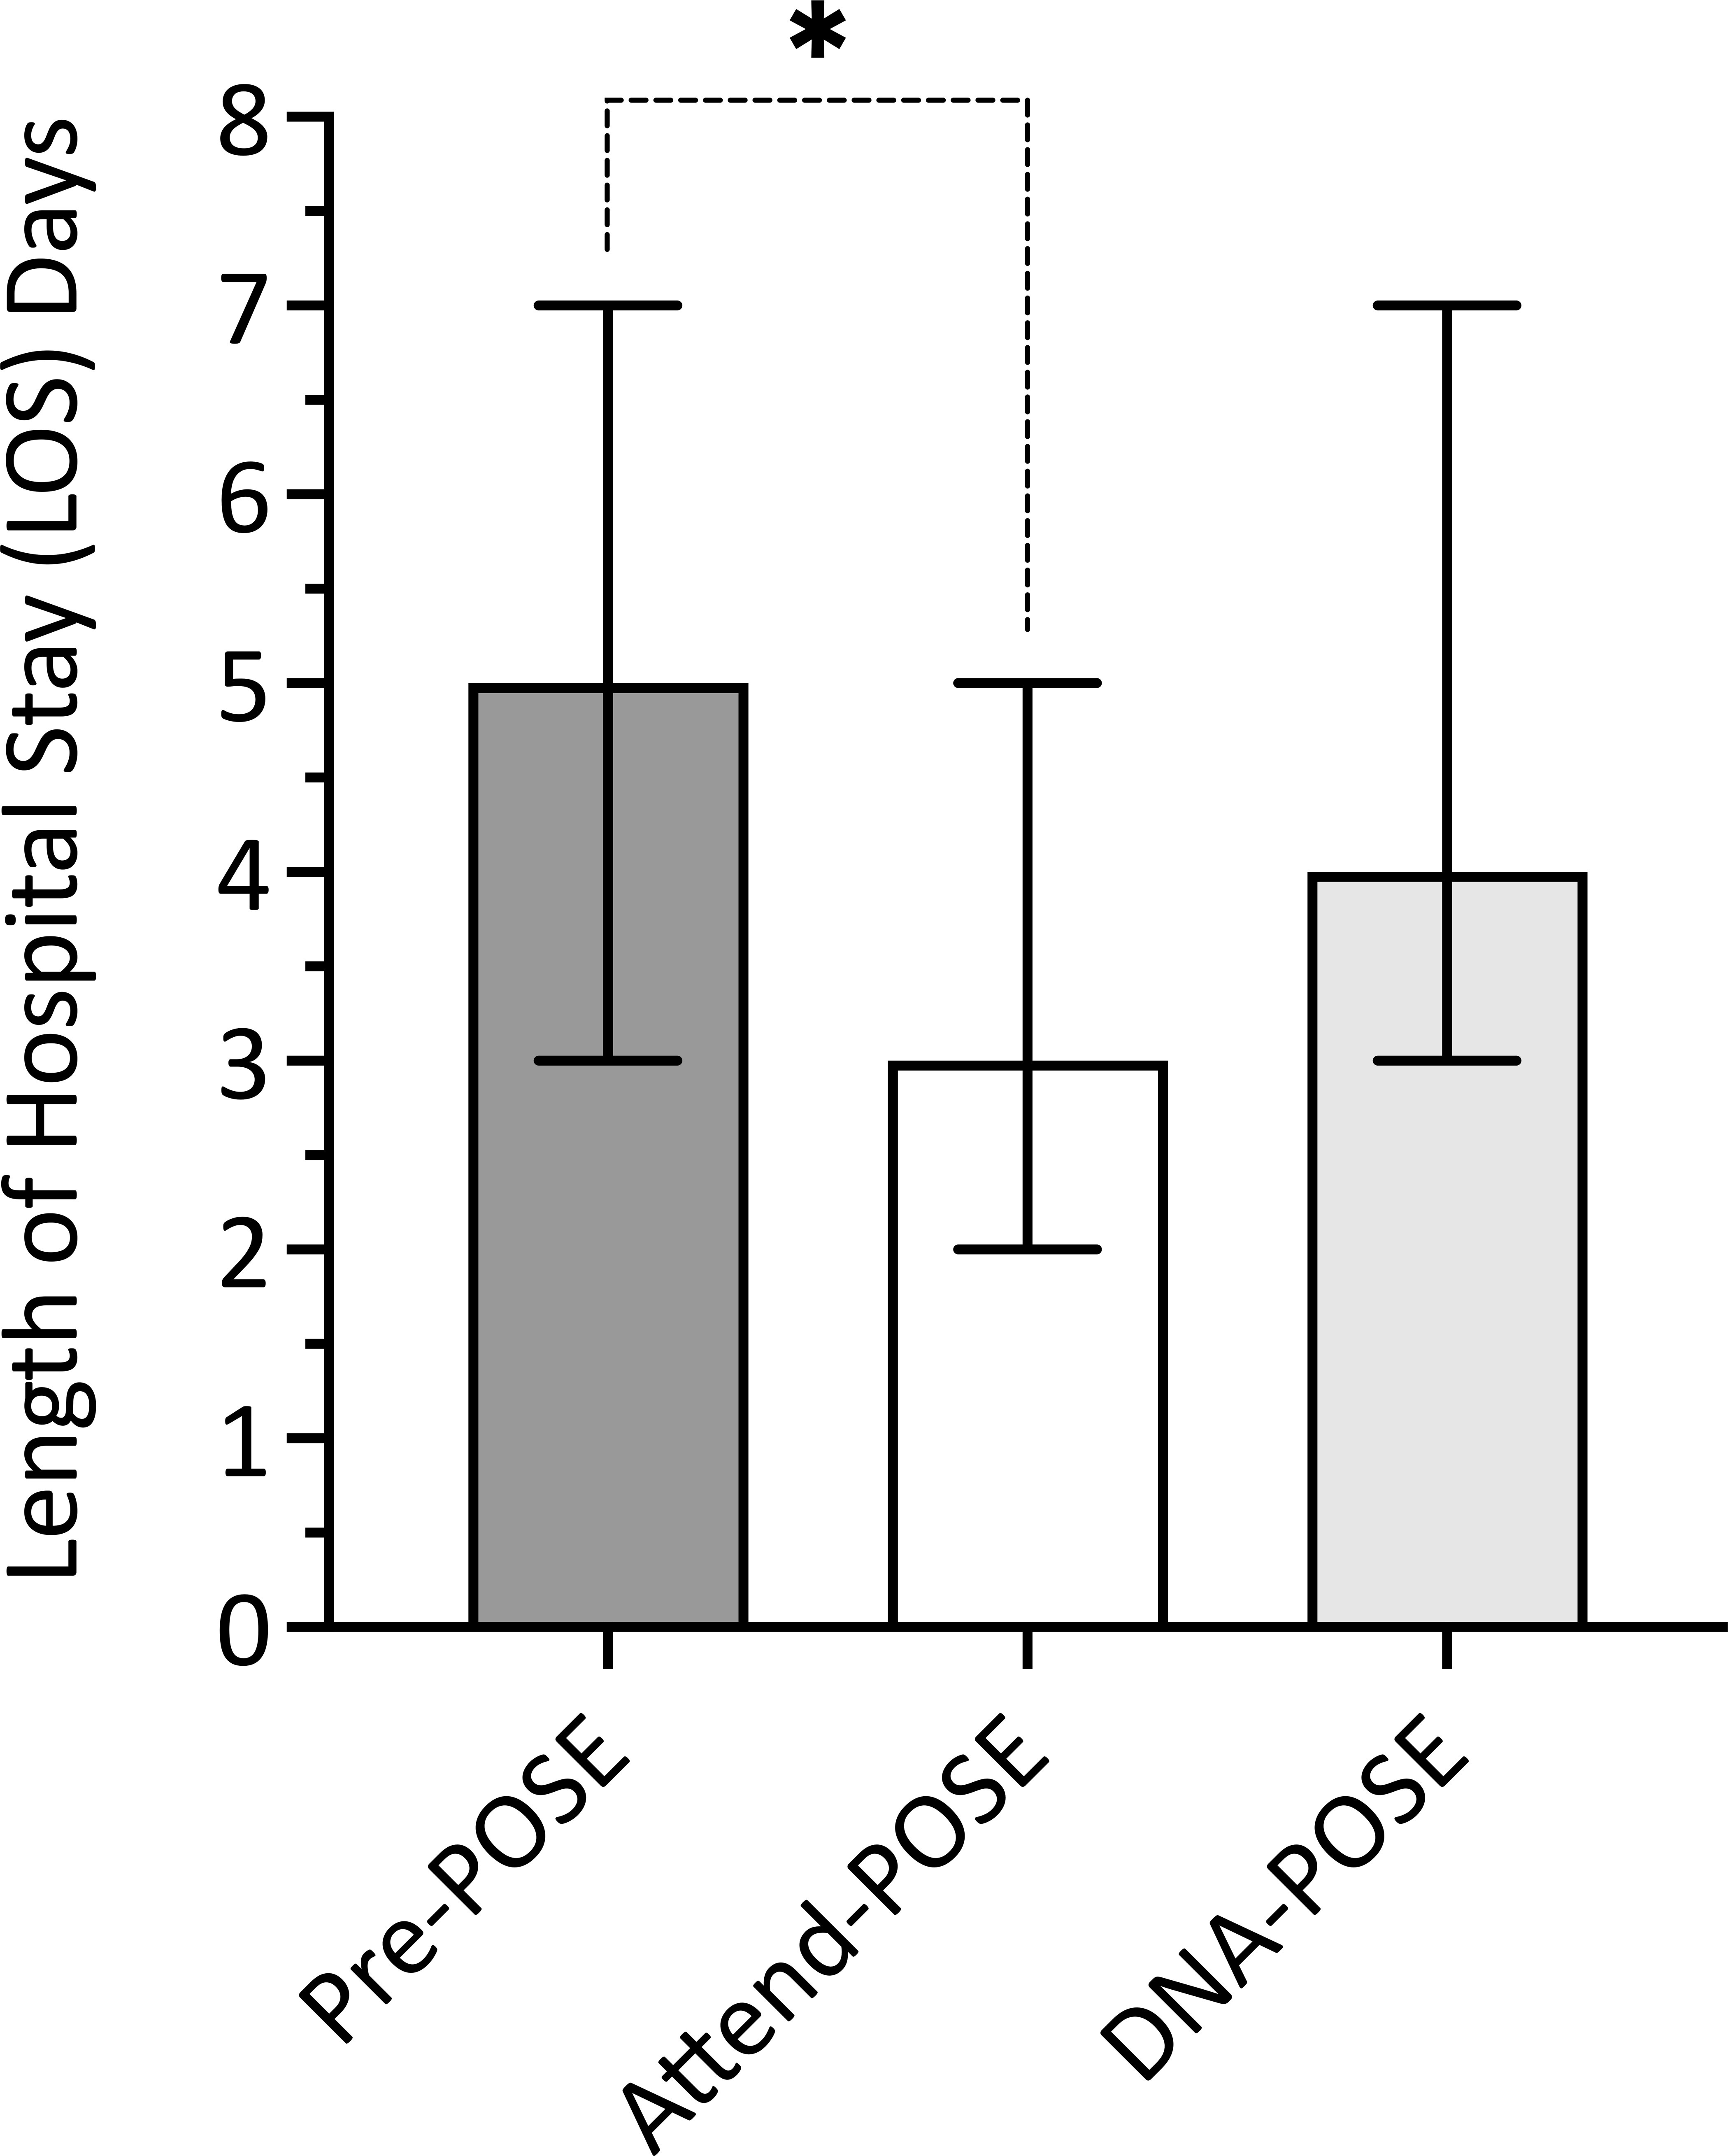 Fig. 1 
          Median length of hospital stay (LOS) by group. Error bars show the interquartile range; *indicates significant pairwise comparison difference at the p < 0.05 level. DNA, did not attend; POSE, preoperative spinal education.
        